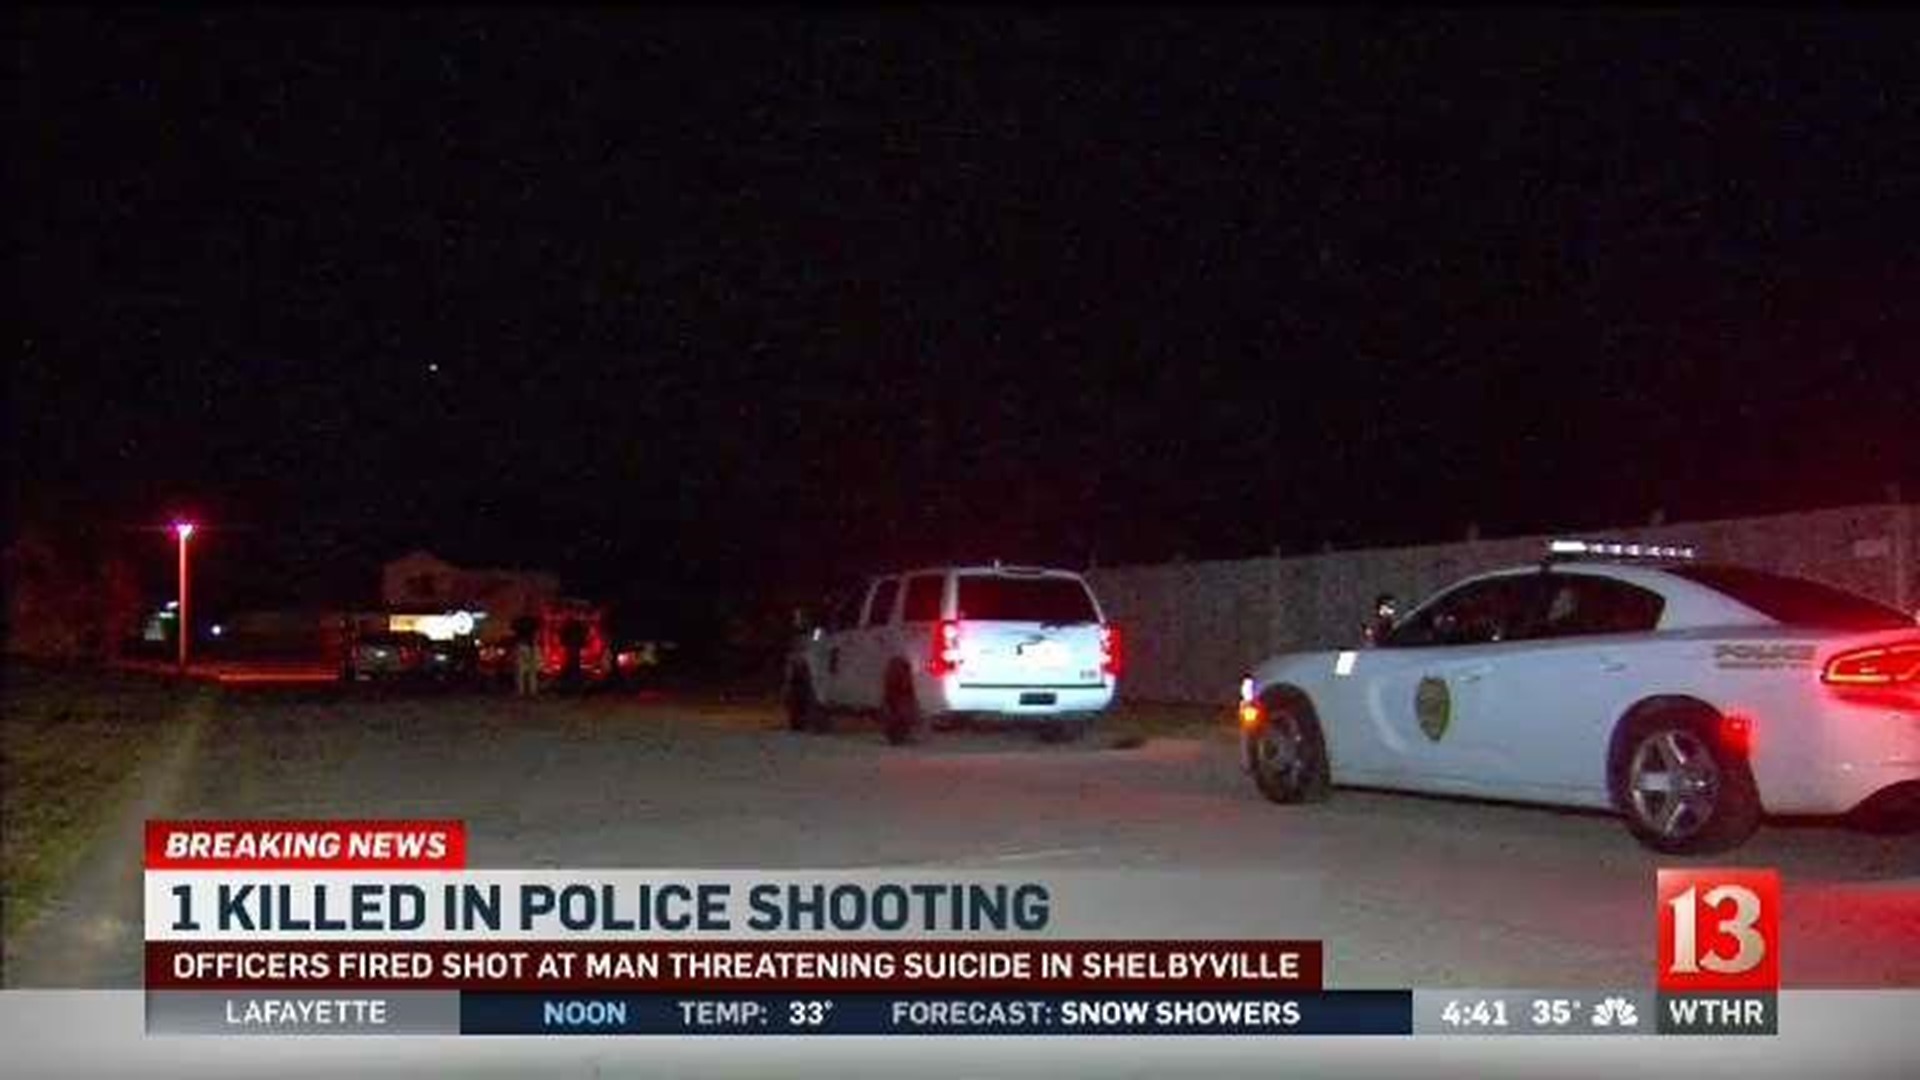 Man dead after shooting involving police in Shelbyville | wthr.com